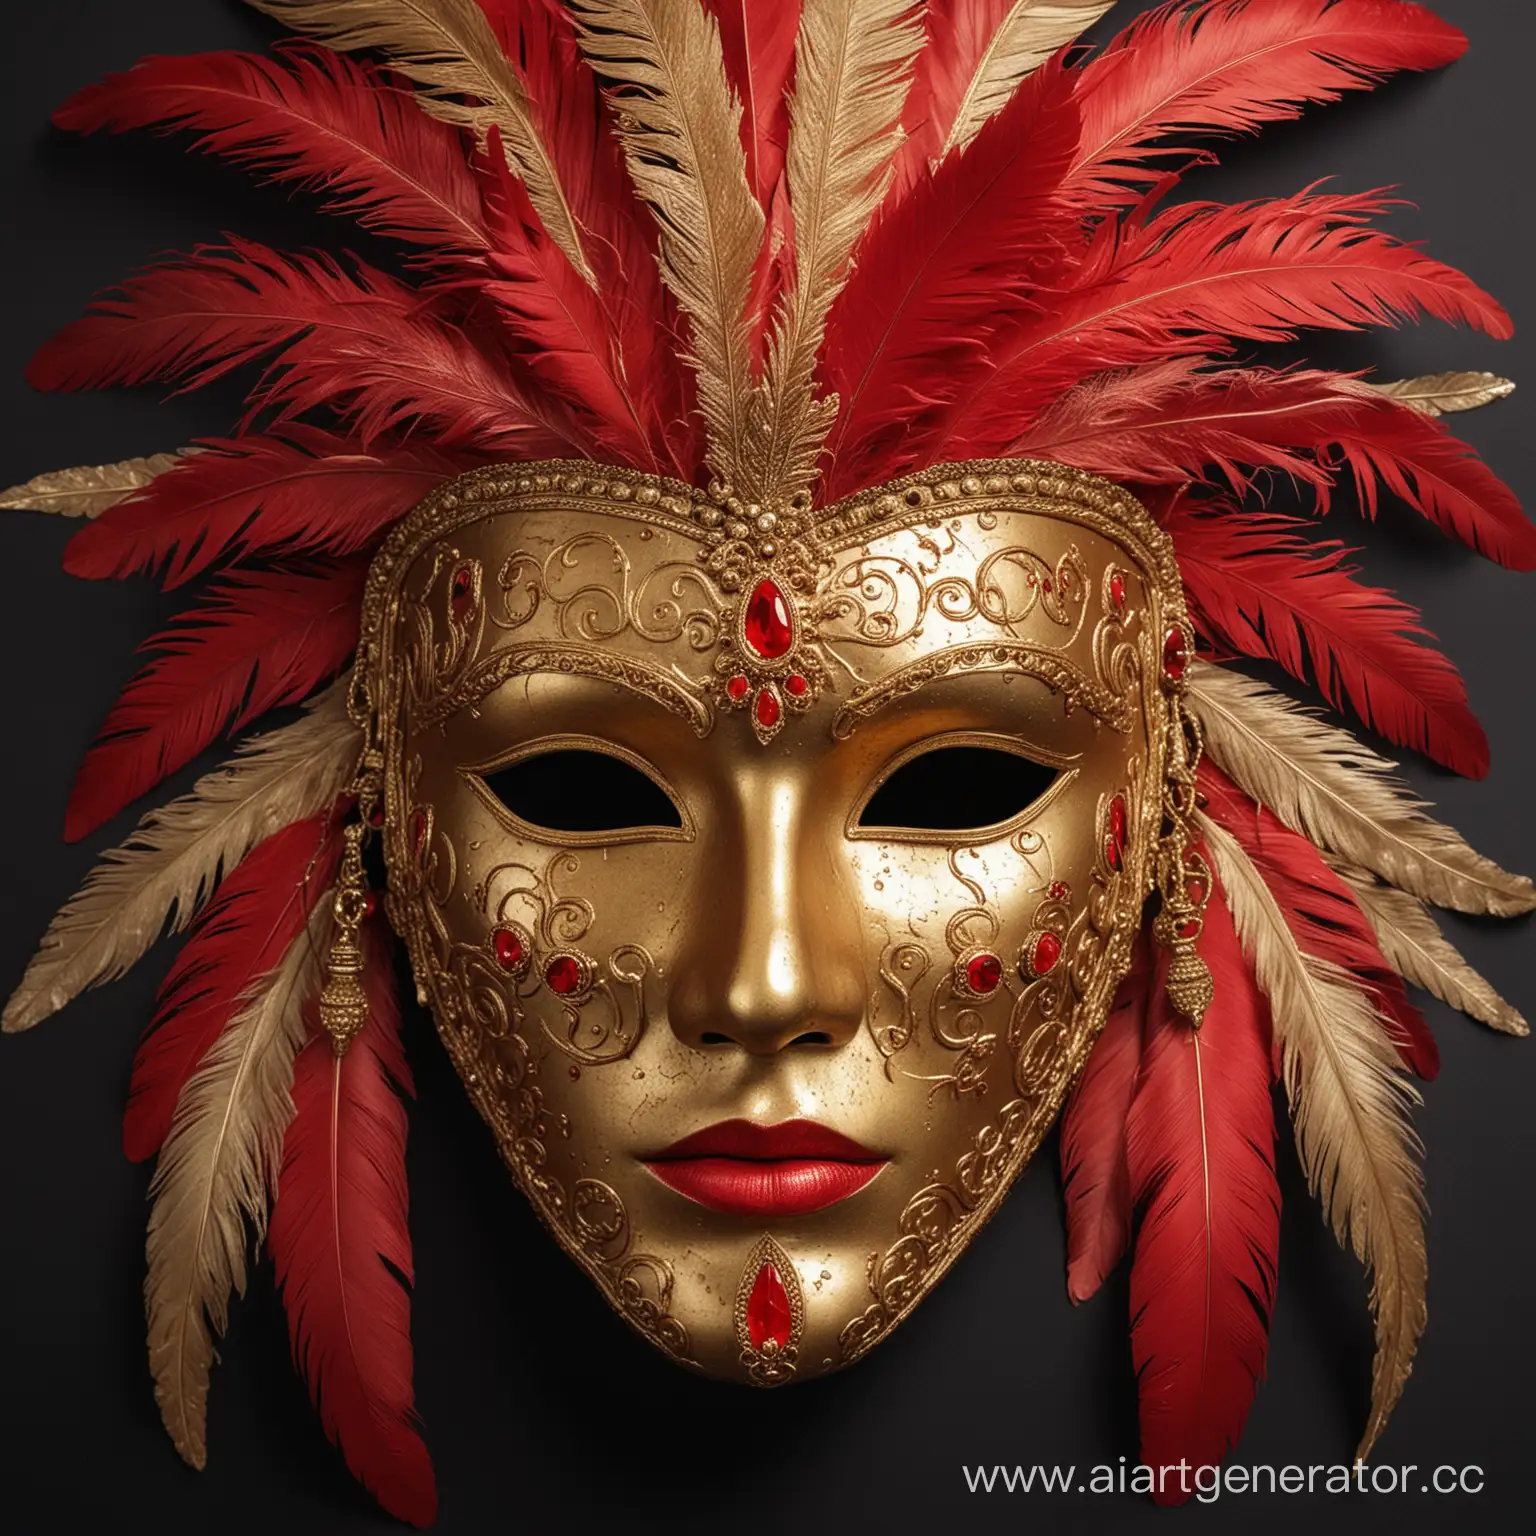 Glamorous-Golden-Masquerade-Mask-with-Vibrant-Red-Accents-and-Elegant-Feathers